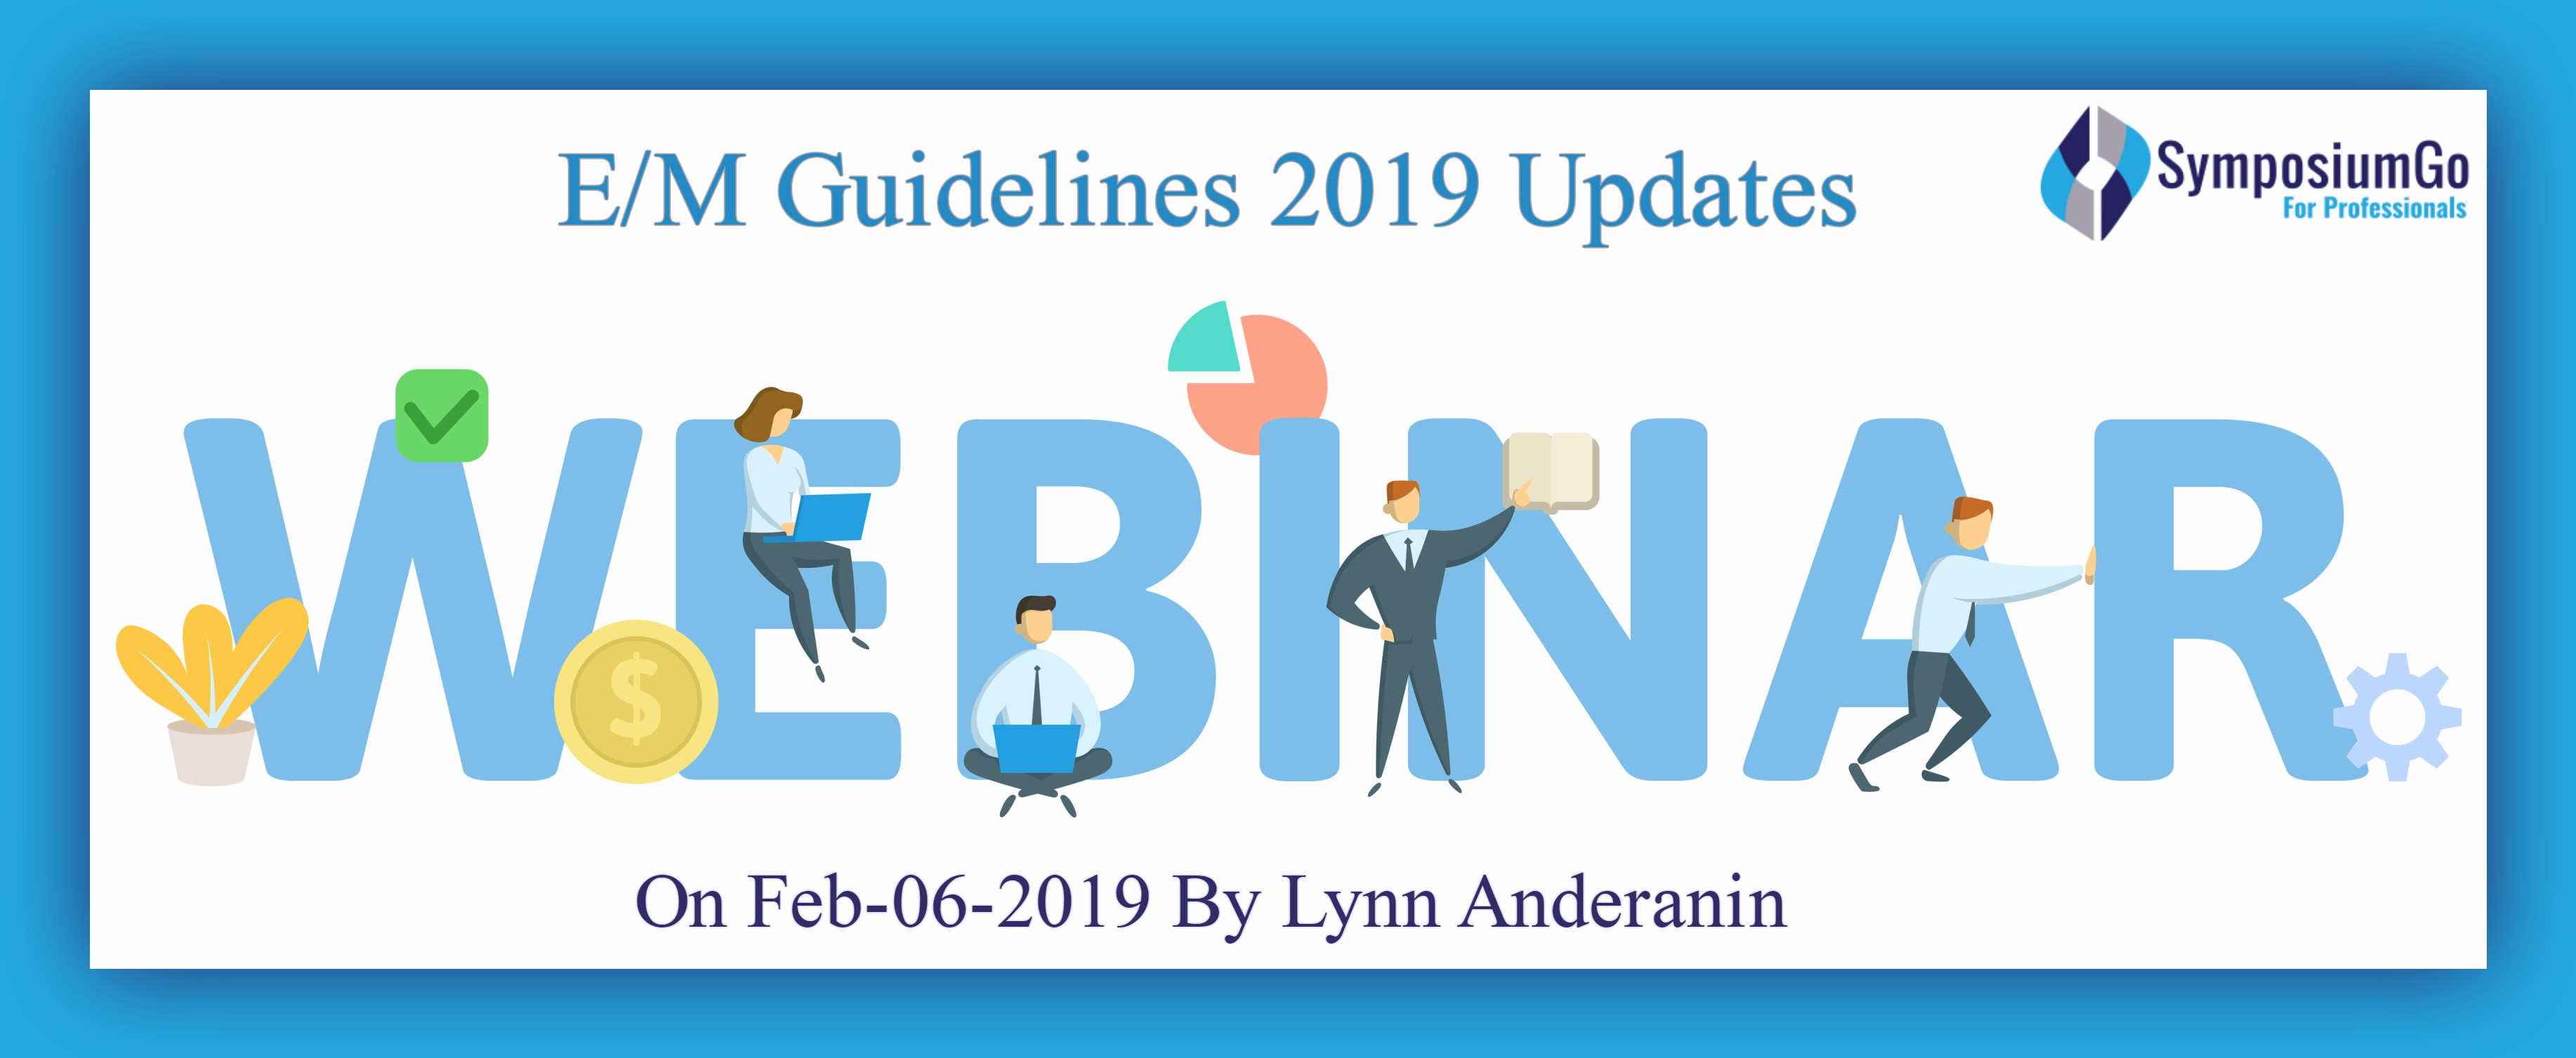 E/M Guidelines 2019 Updates, New York, United States